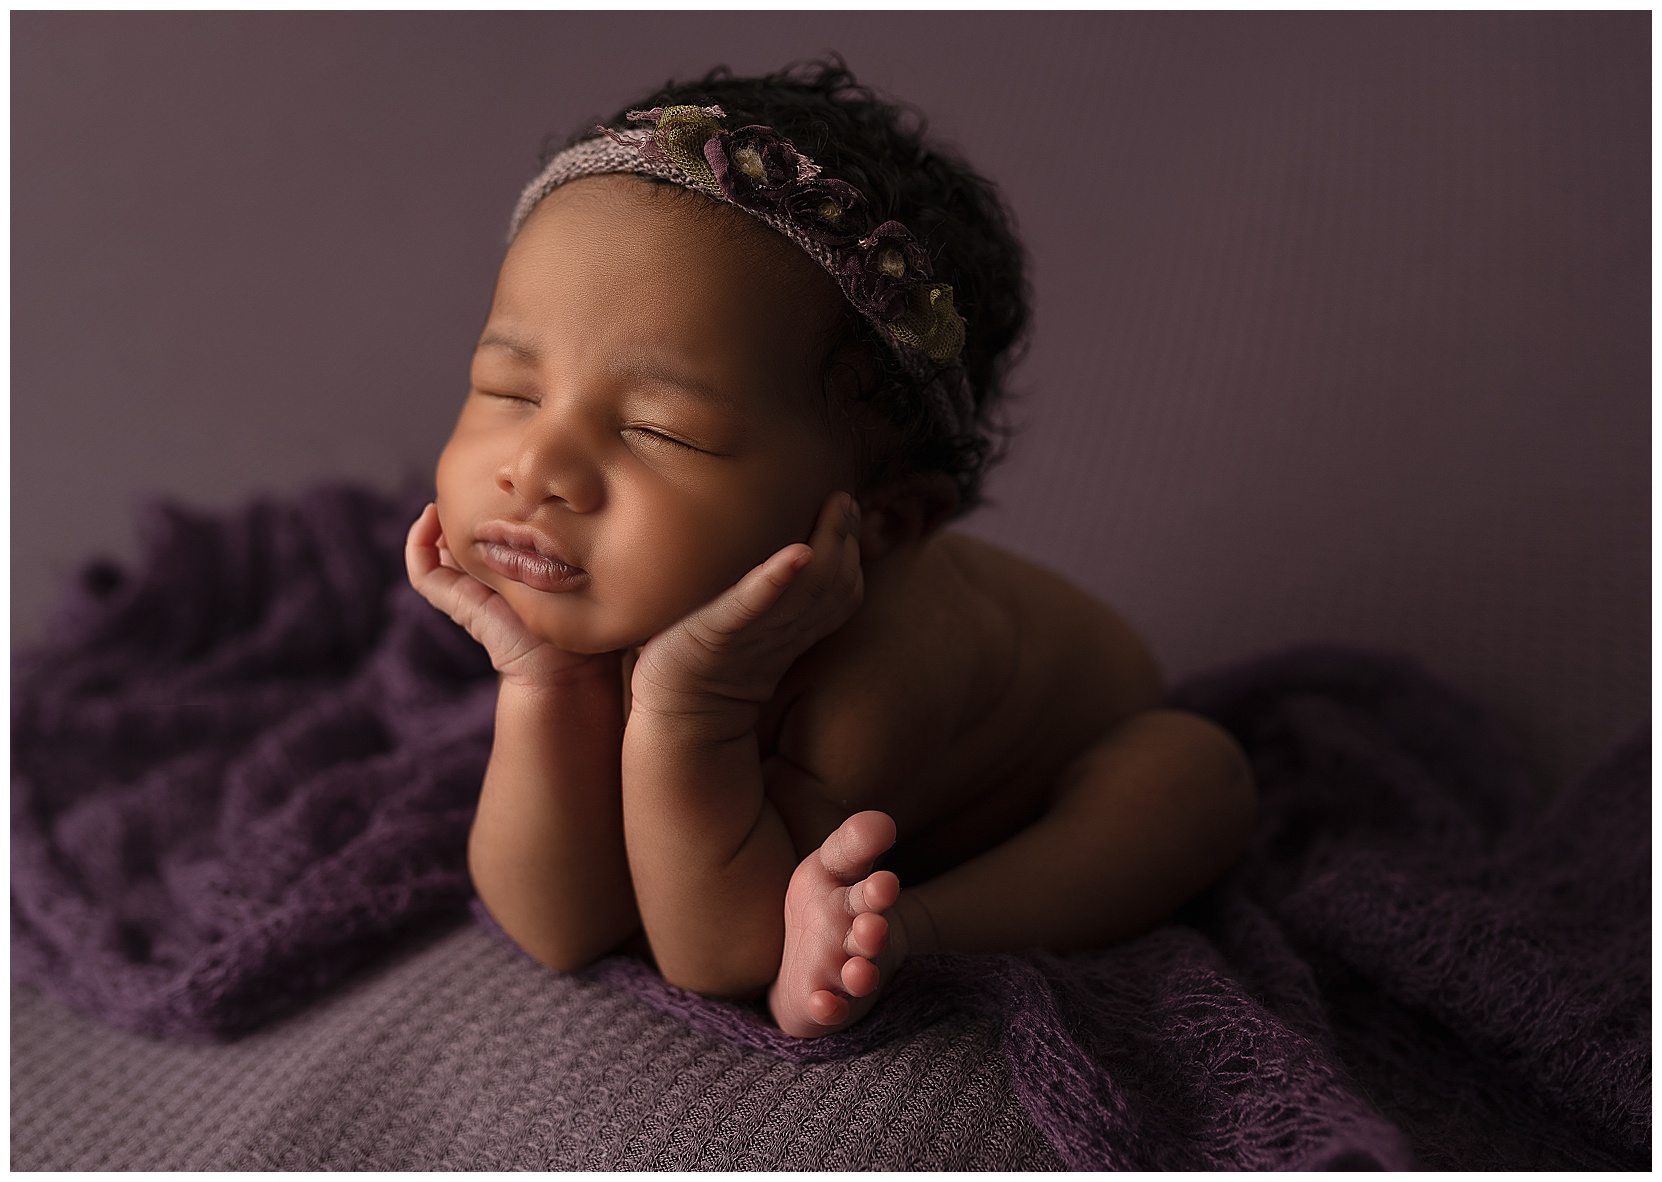 side photo of a newborn baby sleeping in the froggy pose on a purple blanket